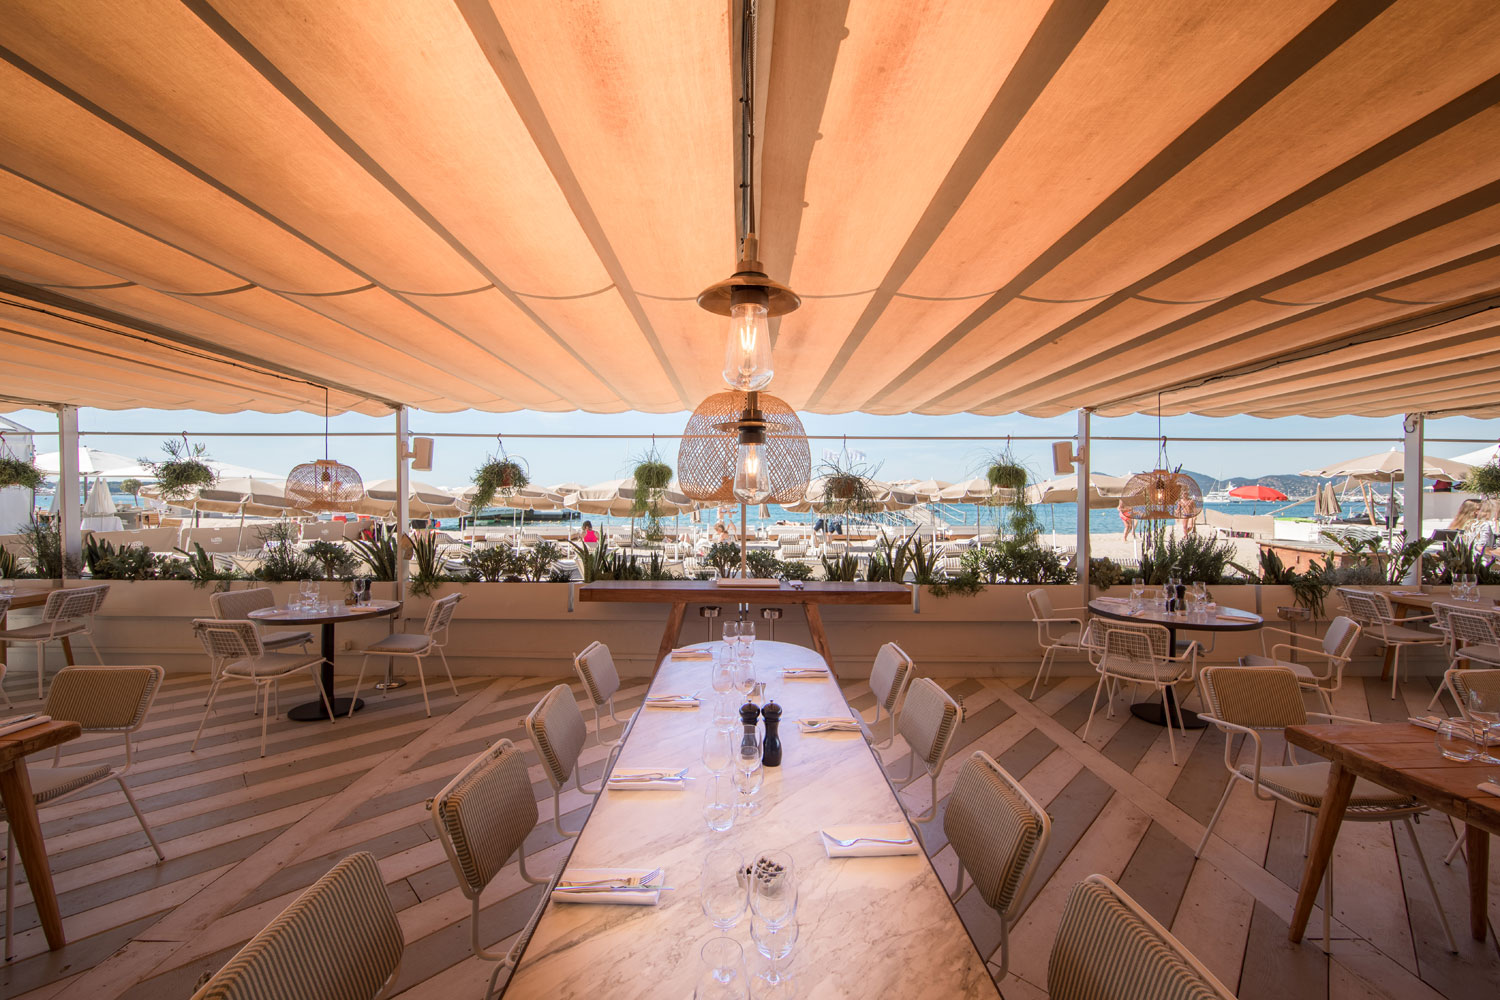 This Cannes beachfront hotel features our vintage-style outdoor lights